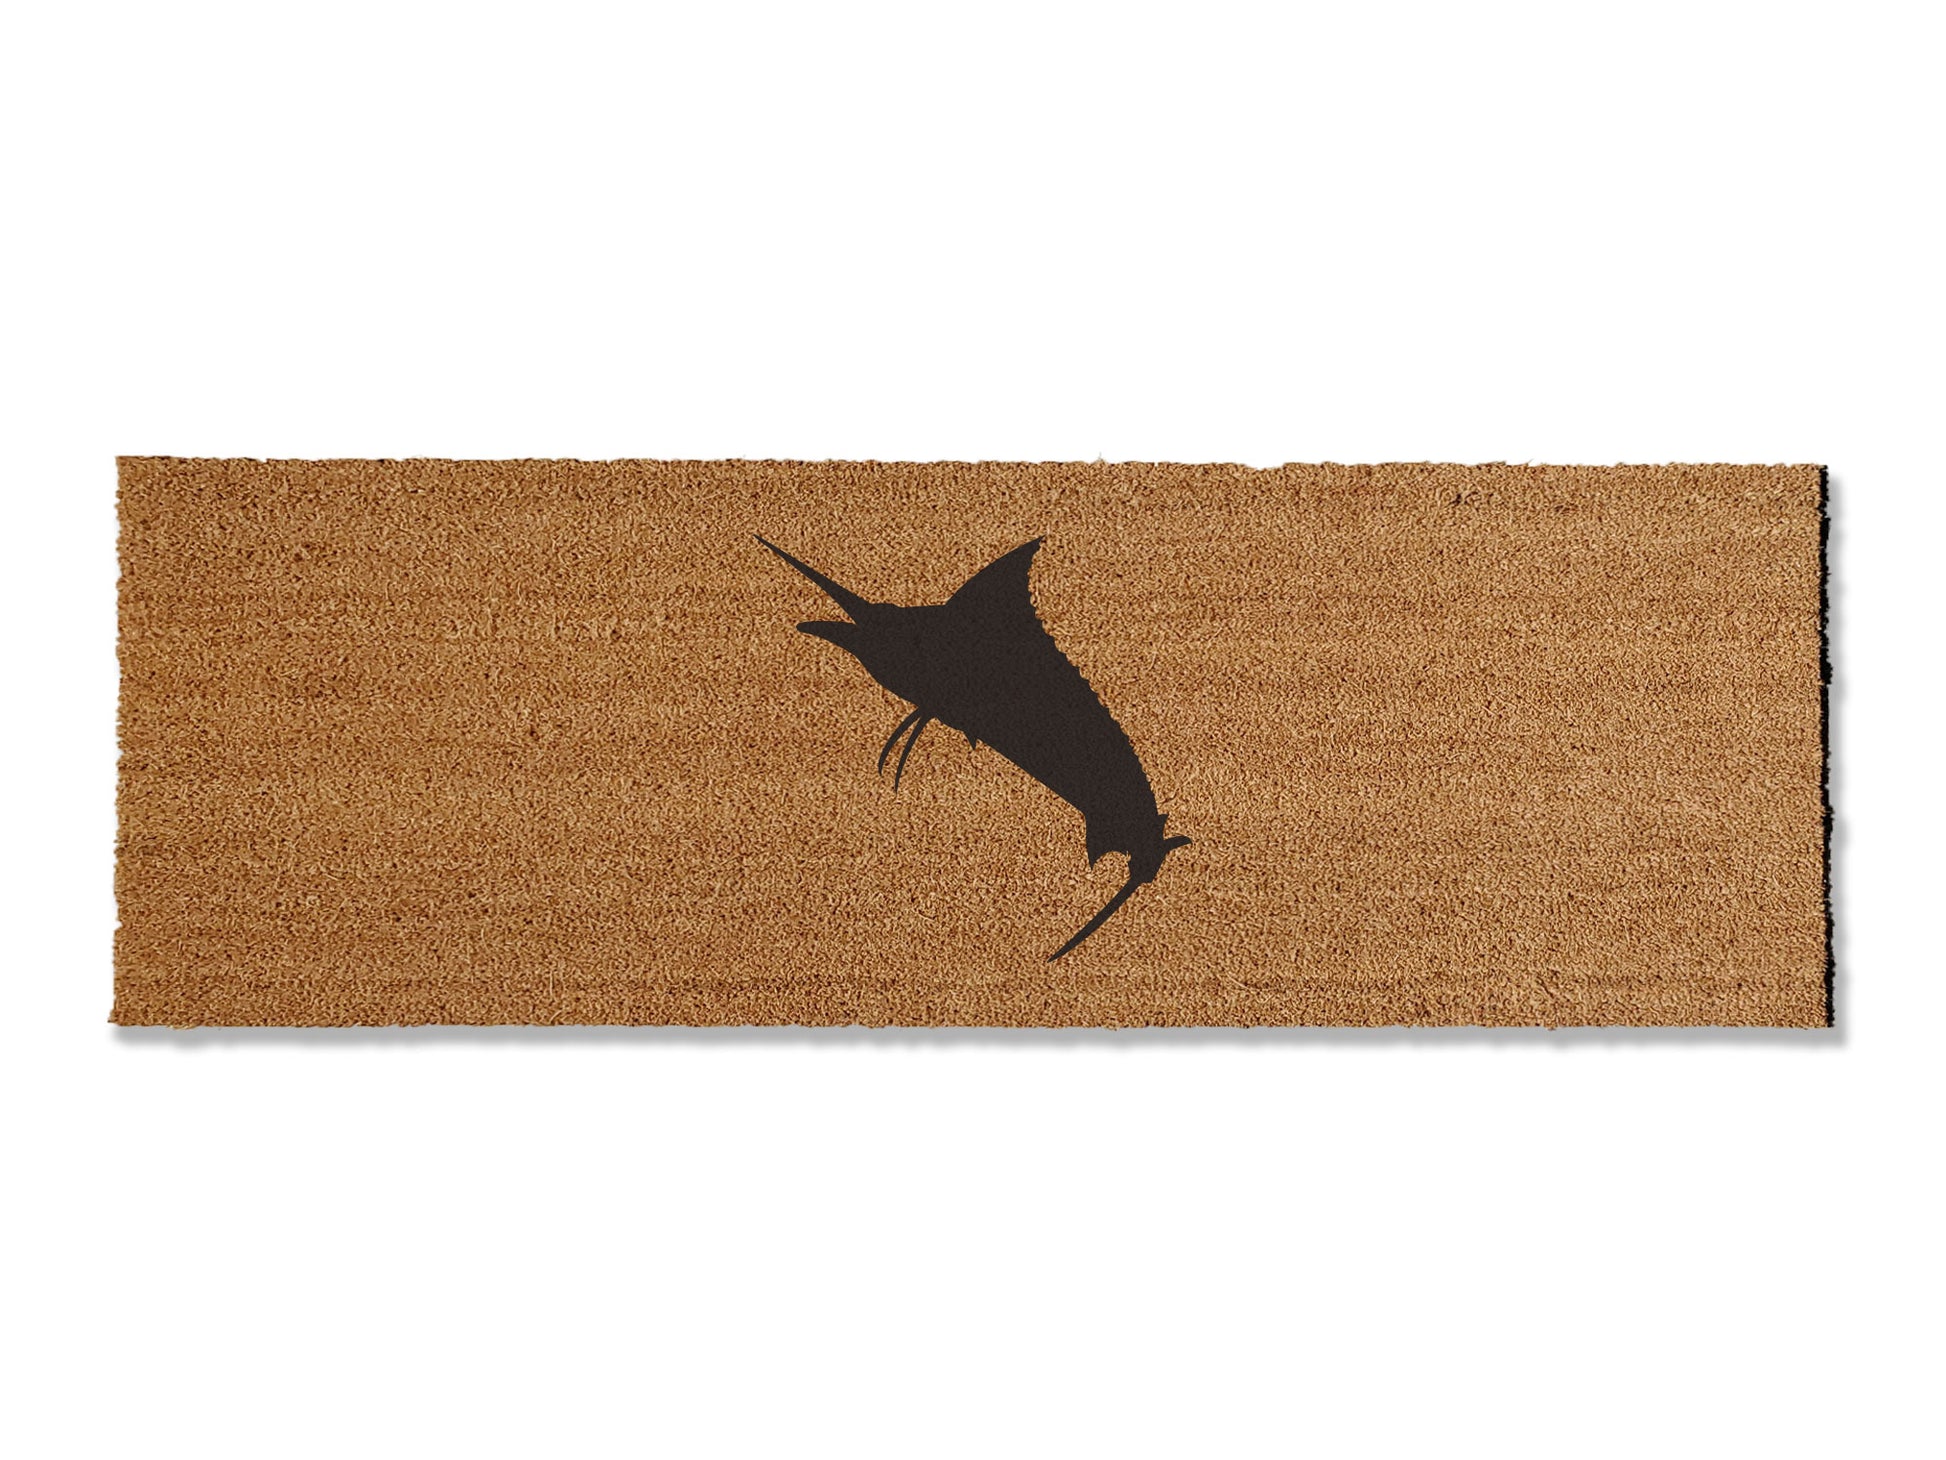 Deck out the entryway with our coir doormat designed for the avid saltwater fisherman, featuring a striking marlin. Available in multiple sizes, this thoughtful mat is an ideal Father's Day gift, adding a touch of nautical charm to welcome guests while effectively trapping dirt.